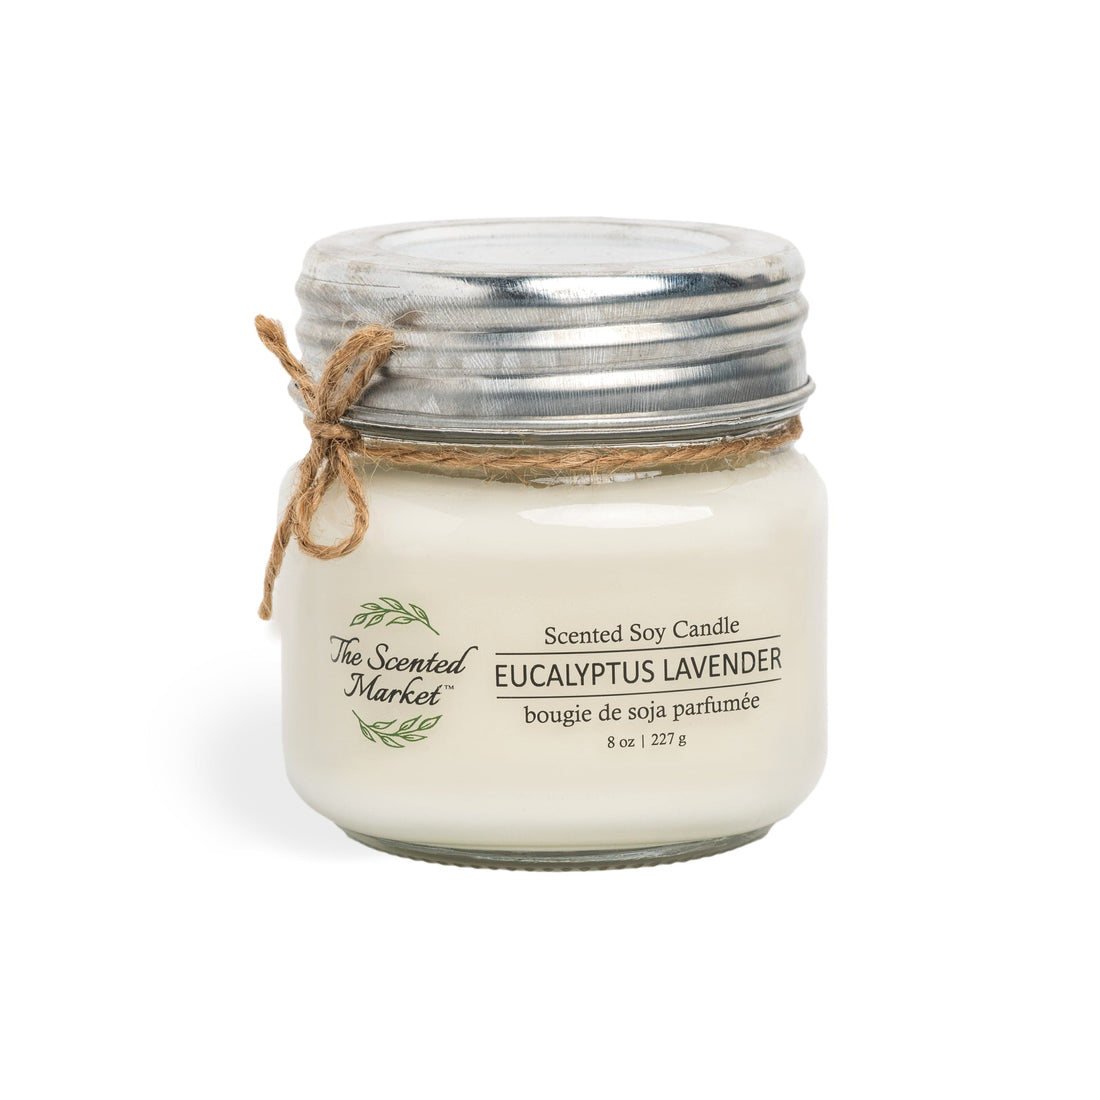 The Scented Market Eucalyptus & Lavender Scented Soy Candle